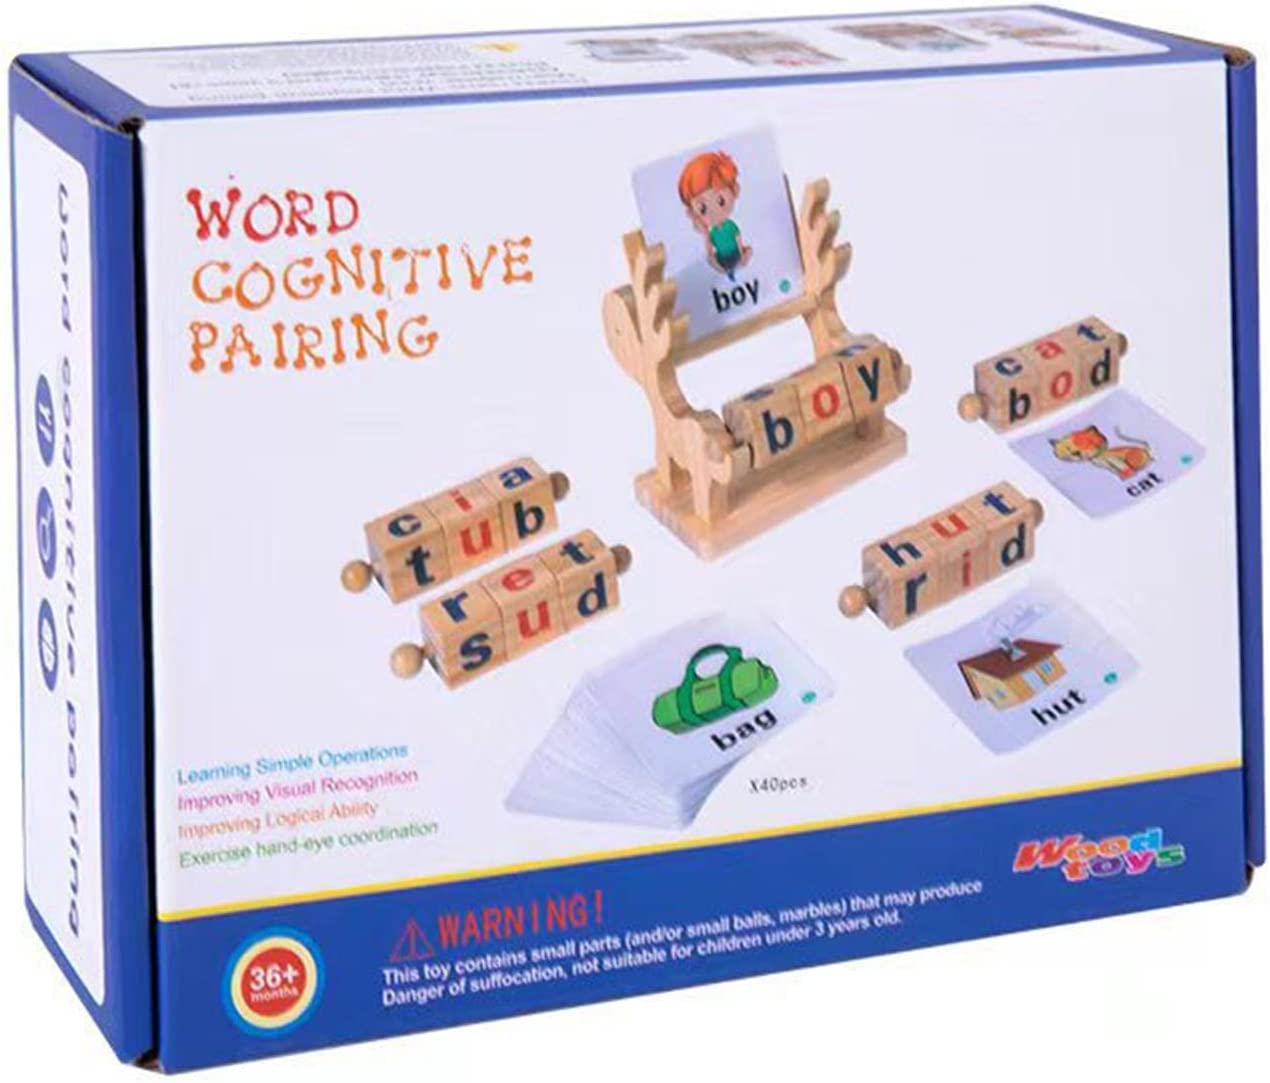 Stand Word Cognitive Pairing